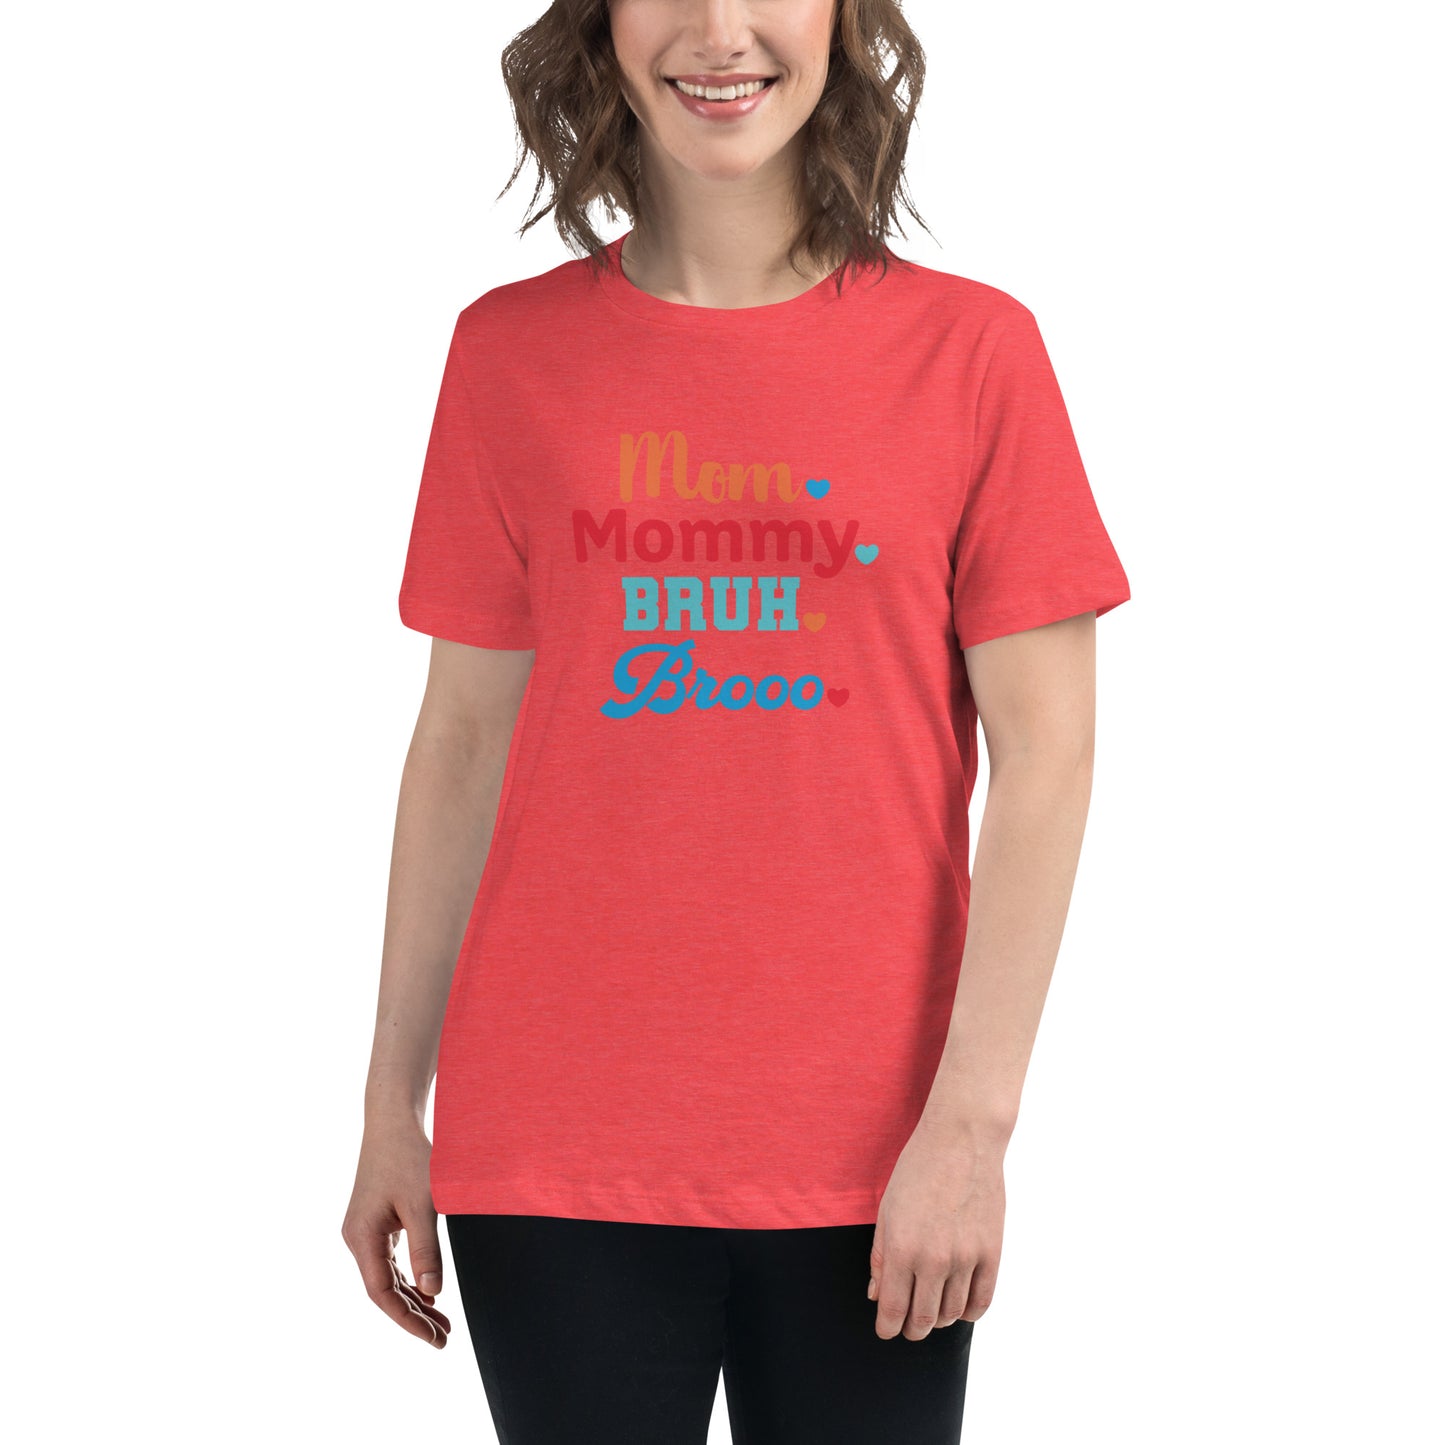 Mom, Mommy, Bruh, Broo Women's Relaxed T-Shirt